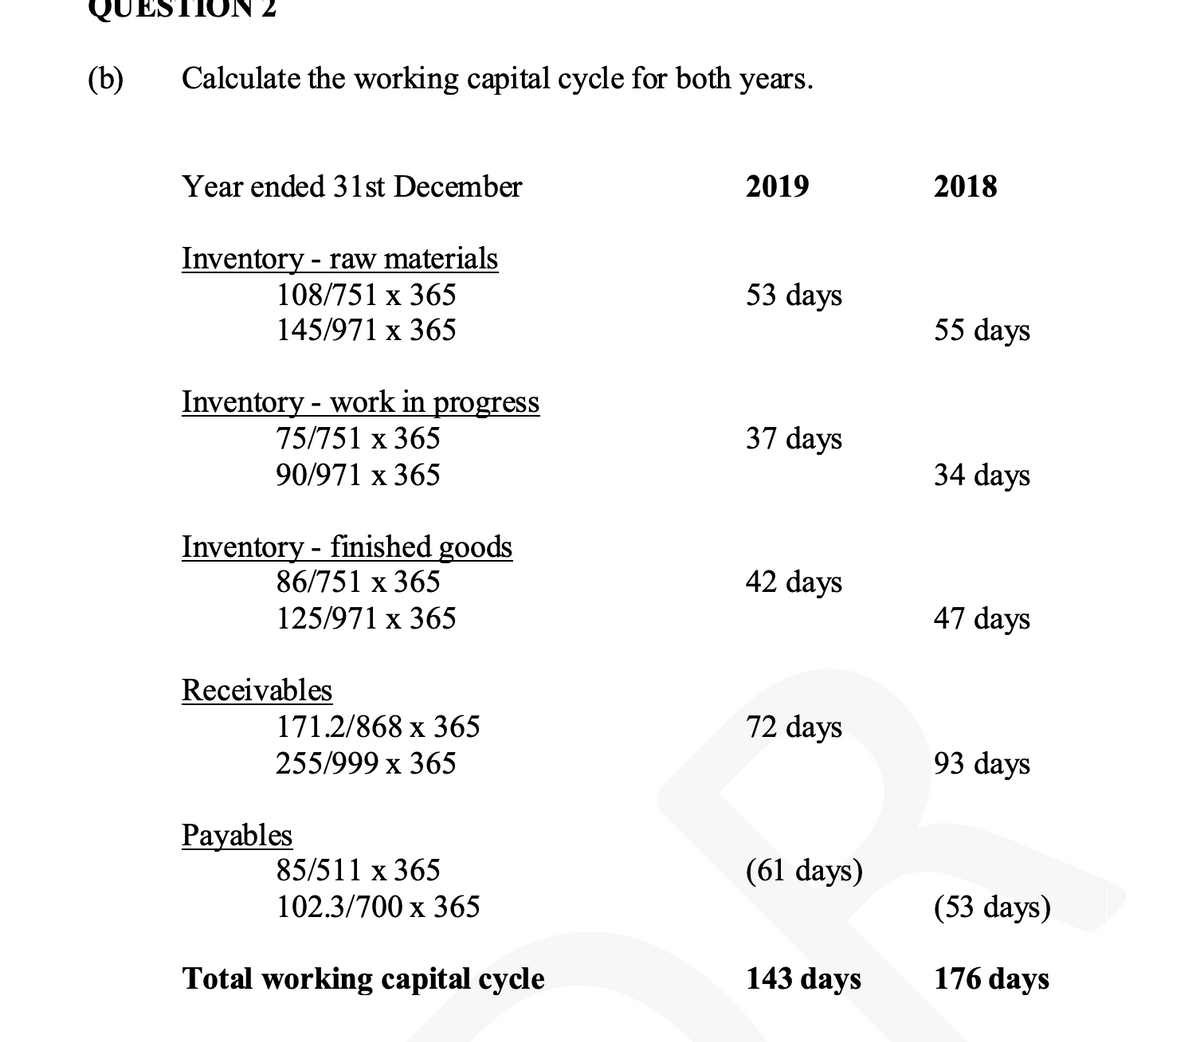 QUESTION
(b)
Calculate the working capital cycle for both years.
Year ended 31st December
2019
2018
Inventory - raw materials
108/751 х 365
53 days
145/971 х 365
55 days
Inventory - work in progress
75/751 x 365
37 days
90/971 x 365
34 days
Inventory - finished goods
86/751 x 365
42 days
125/971 x 365
47 days
Receivables
171.2/868 x 365
72 days
255/999 х 365
93 days
Payables
85/511 x 365
(61 days)
102.3/700 x 365
(53 days)
Total working capital cycle
143 days
176 days
